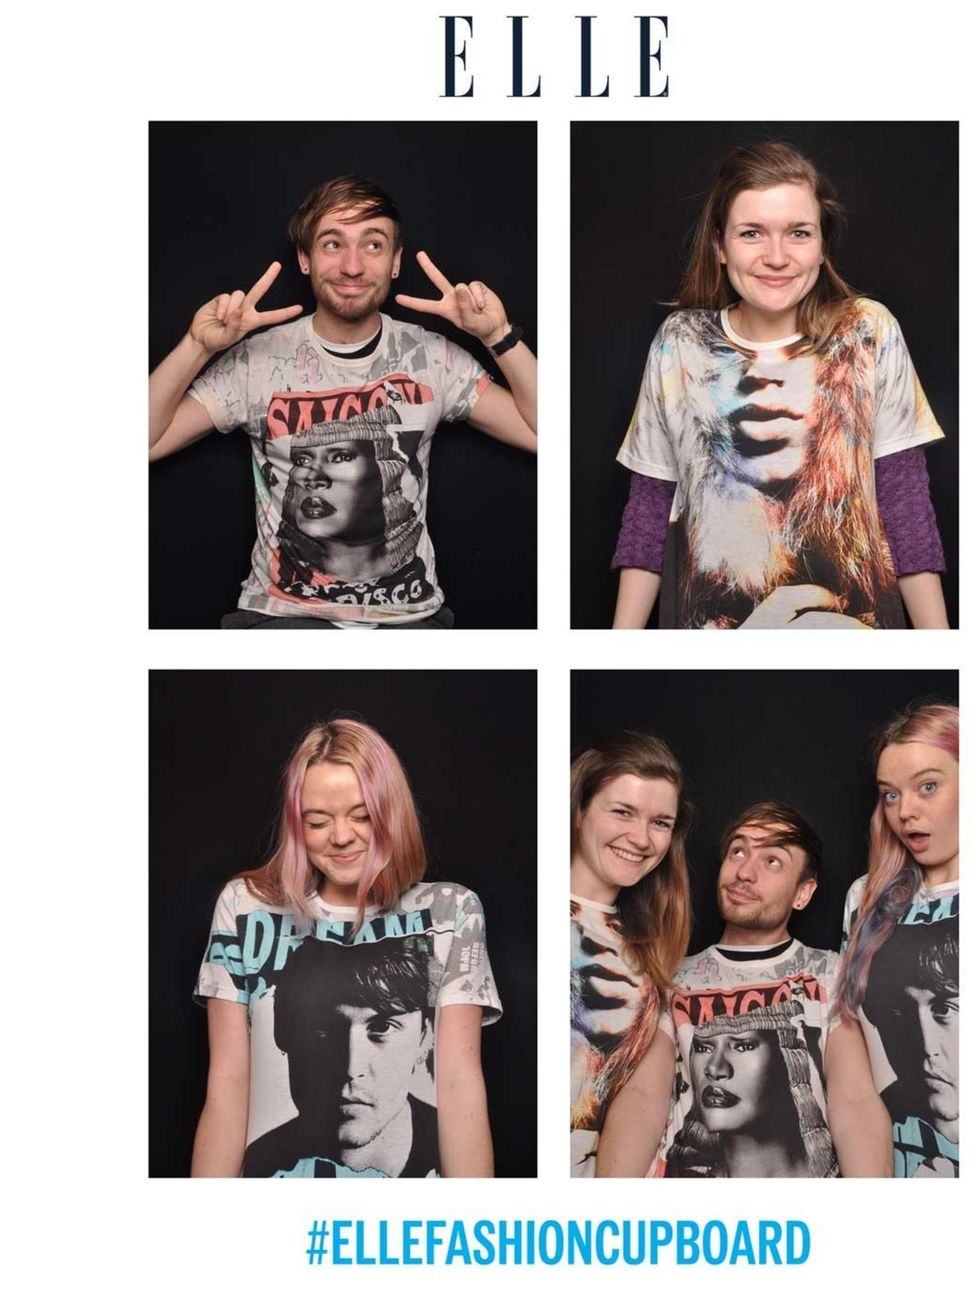 <p>For the first time ever David Bailey has allowed some of his most favourite portraits to be printed onto T-shirts - and team ELLE is pretty impressed with the results. Som much so that we couldn't wait to get into the office photo booth and try them on